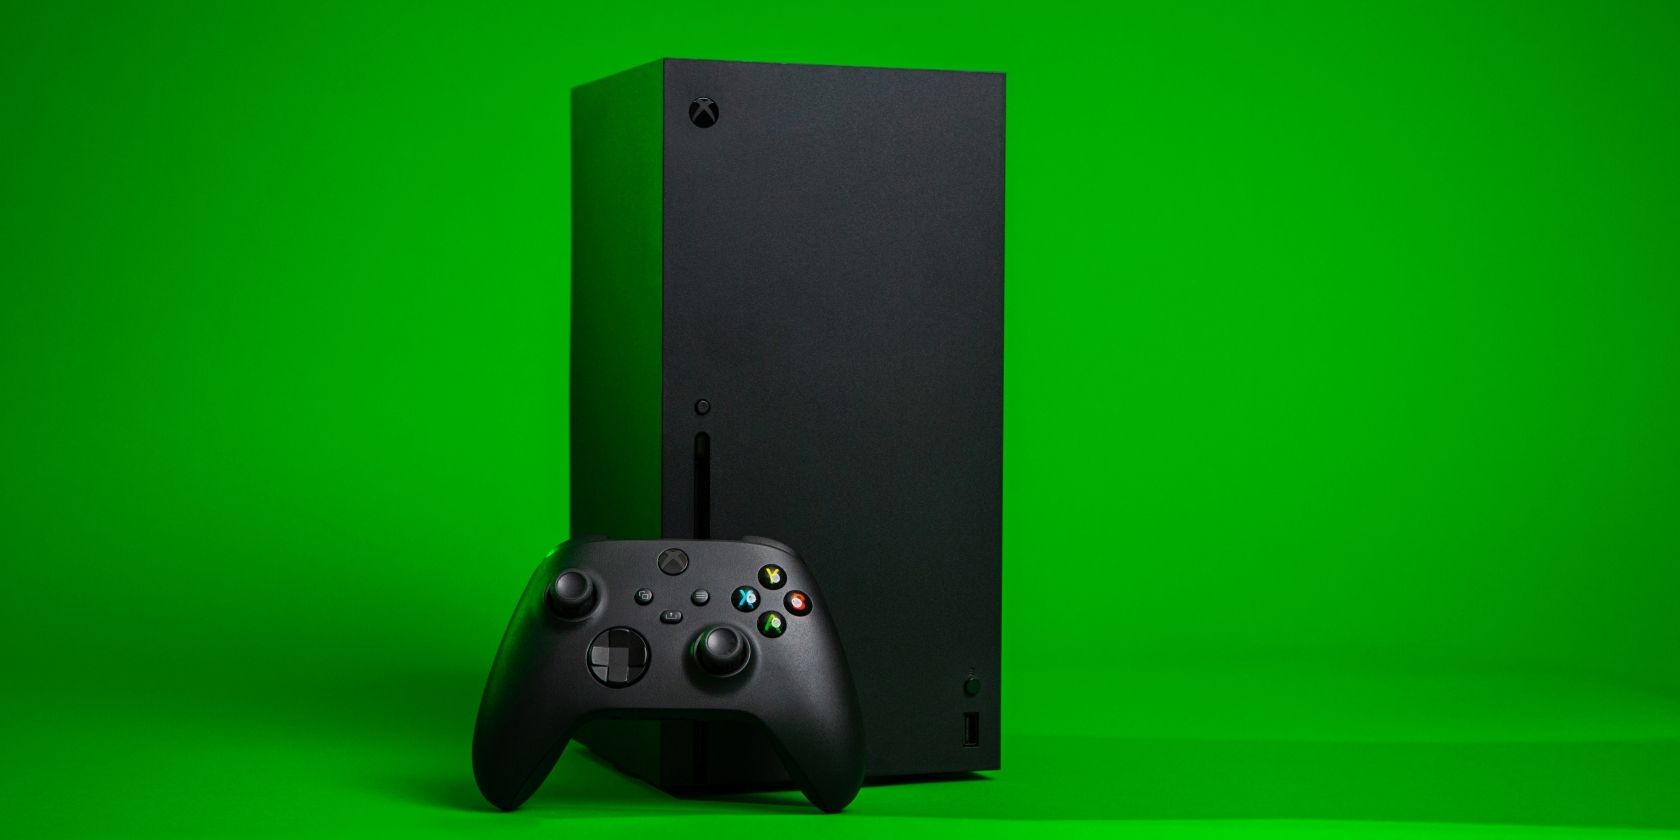 A photograph of an Xbox Series X console and controller against a green background 